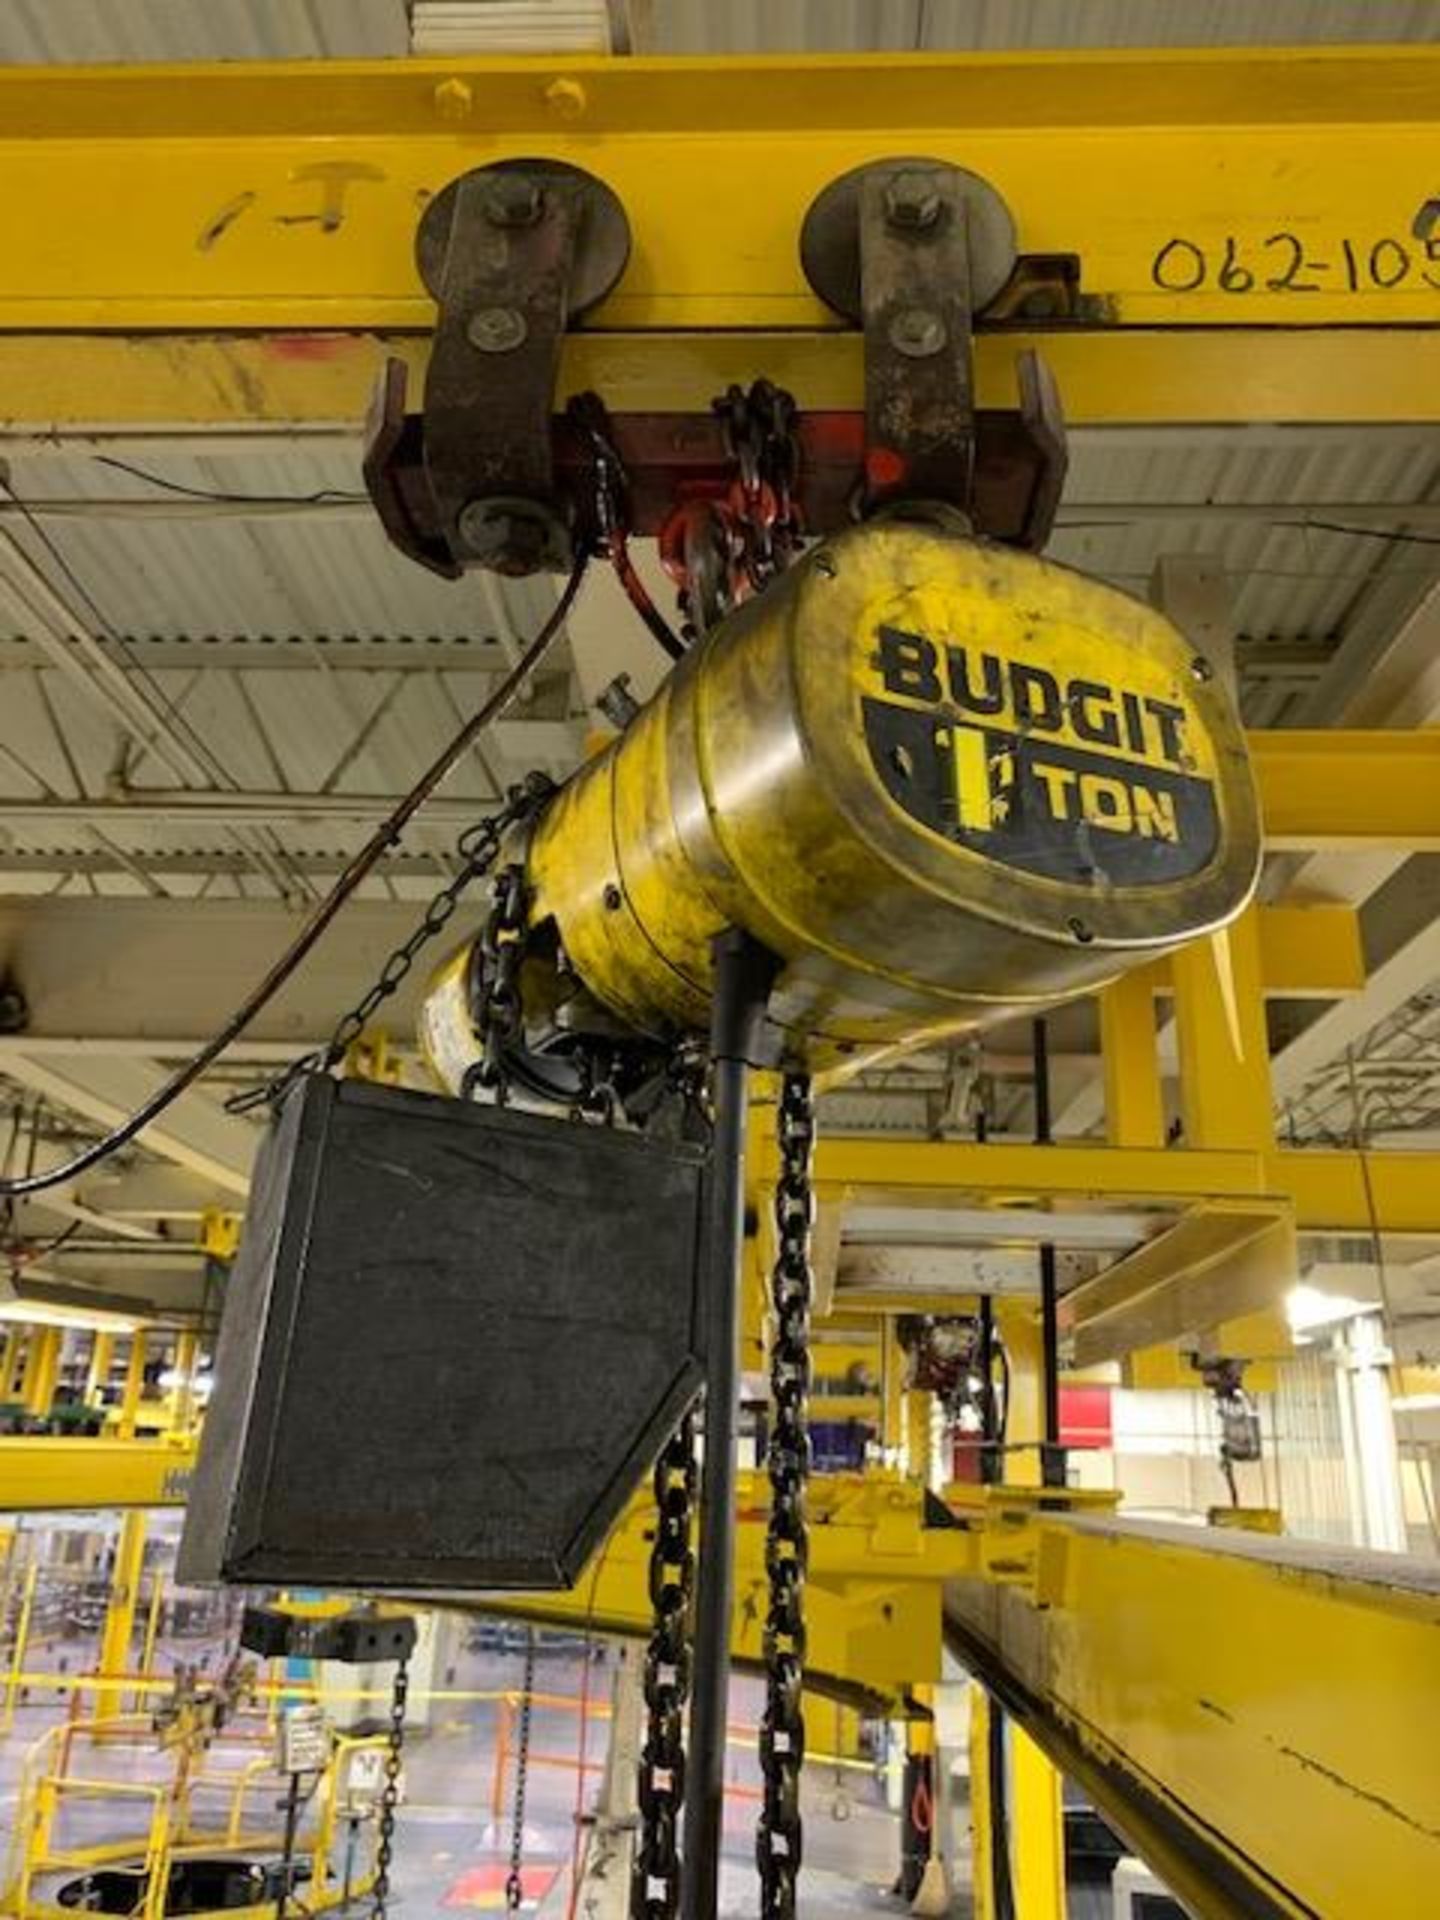 1 Ton Budgit Electric Chain Hoist, w/ Manual Trolley & Pendant - Image 2 of 5